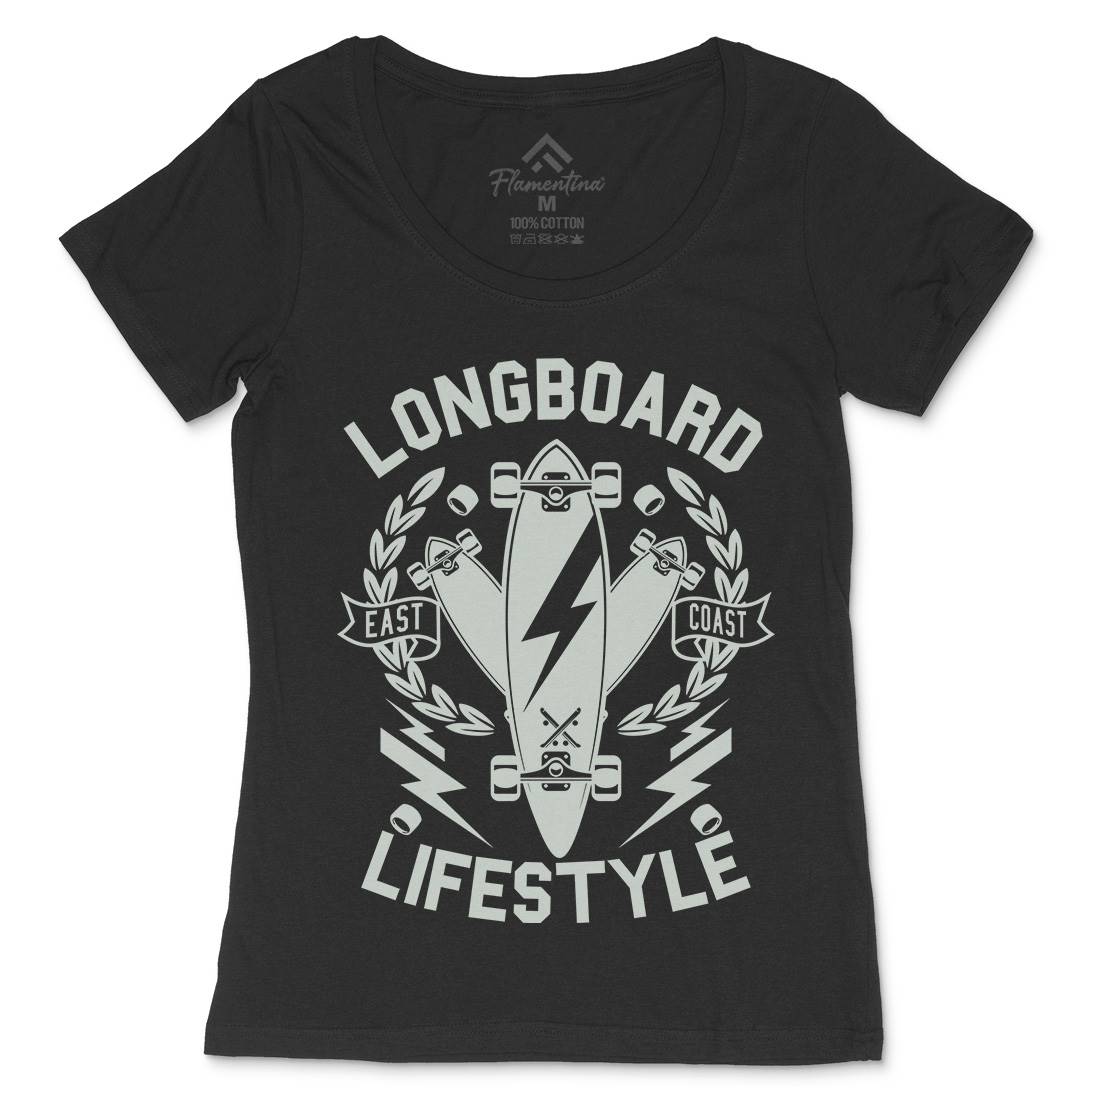 Longboard Lifestyle Womens Scoop Neck T-Shirt Skate A251